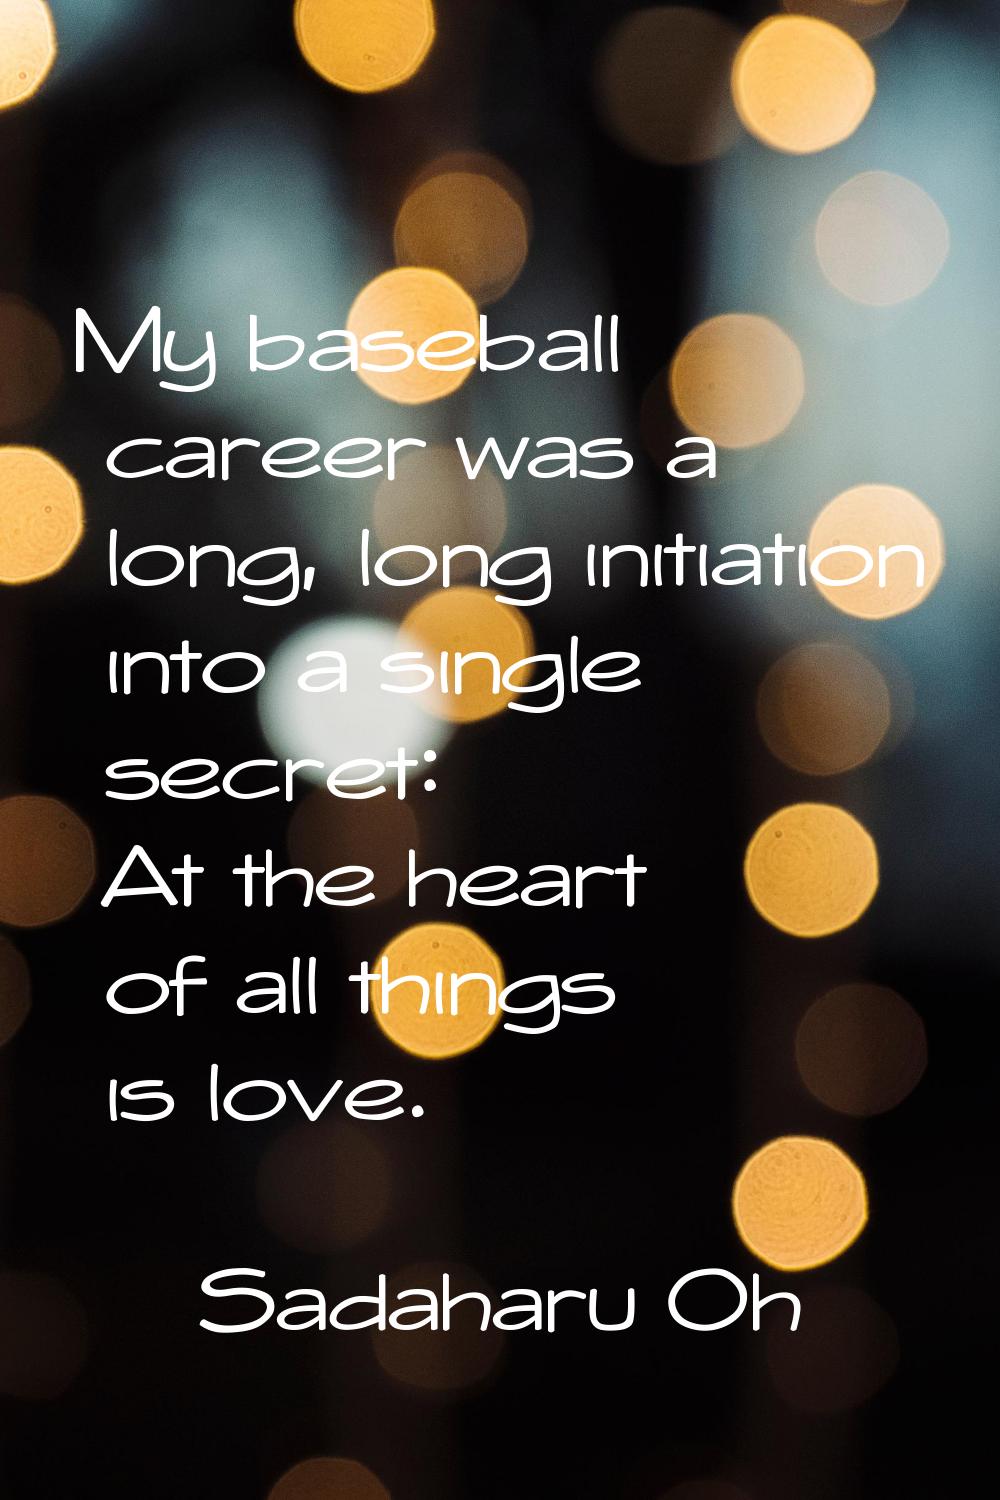 My baseball career was a long, long initiation into a single secret: At the heart of all things is 